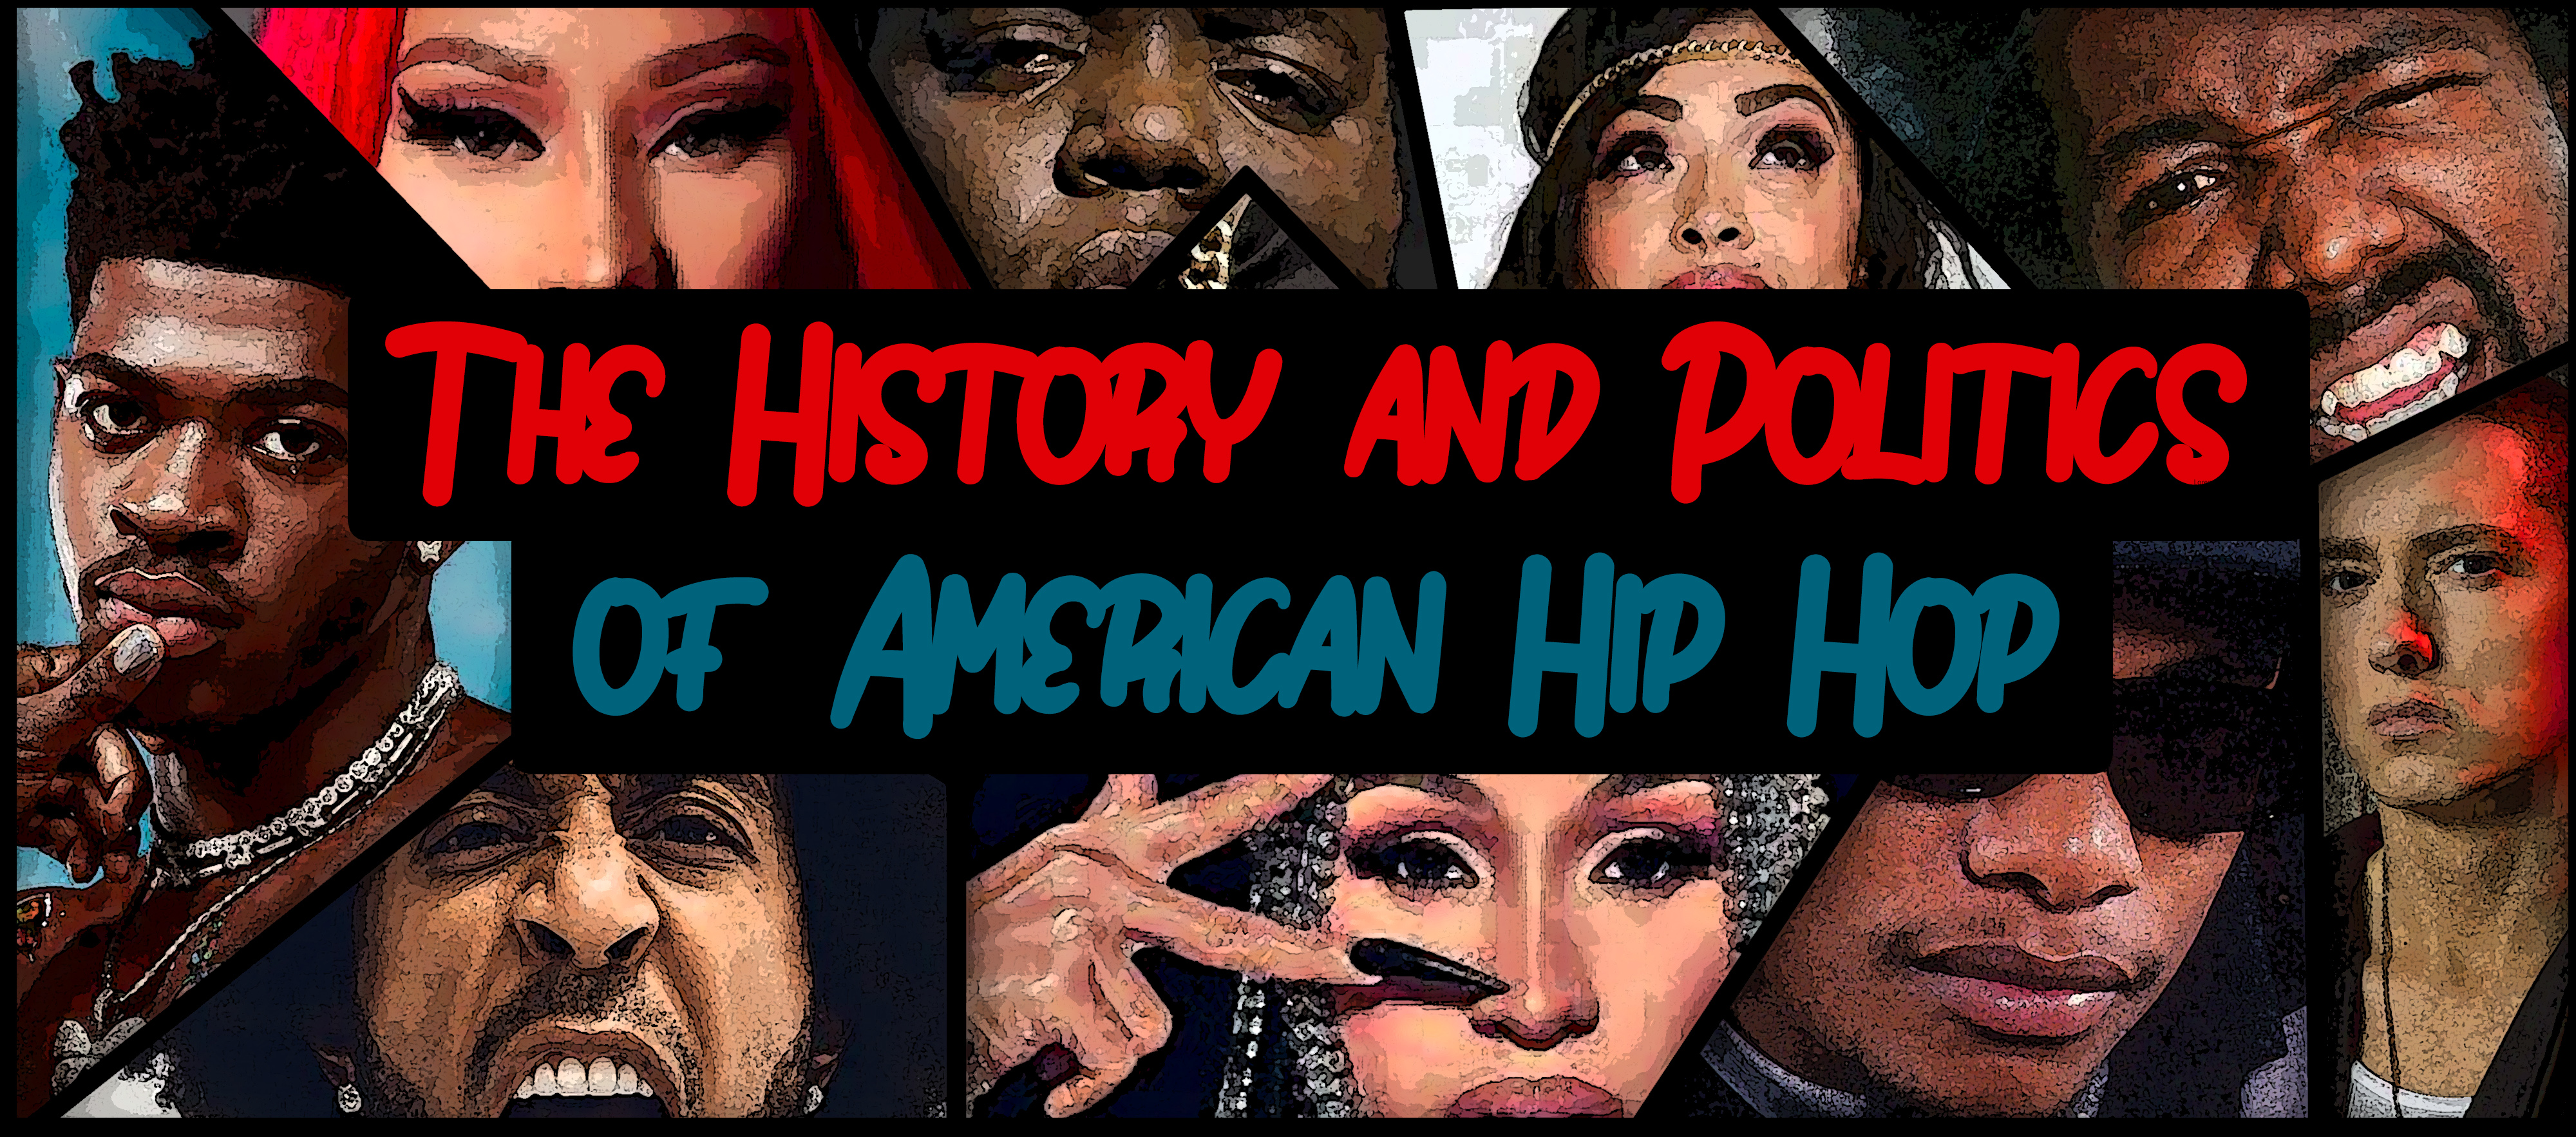 The History and Politics of American Hip Hop